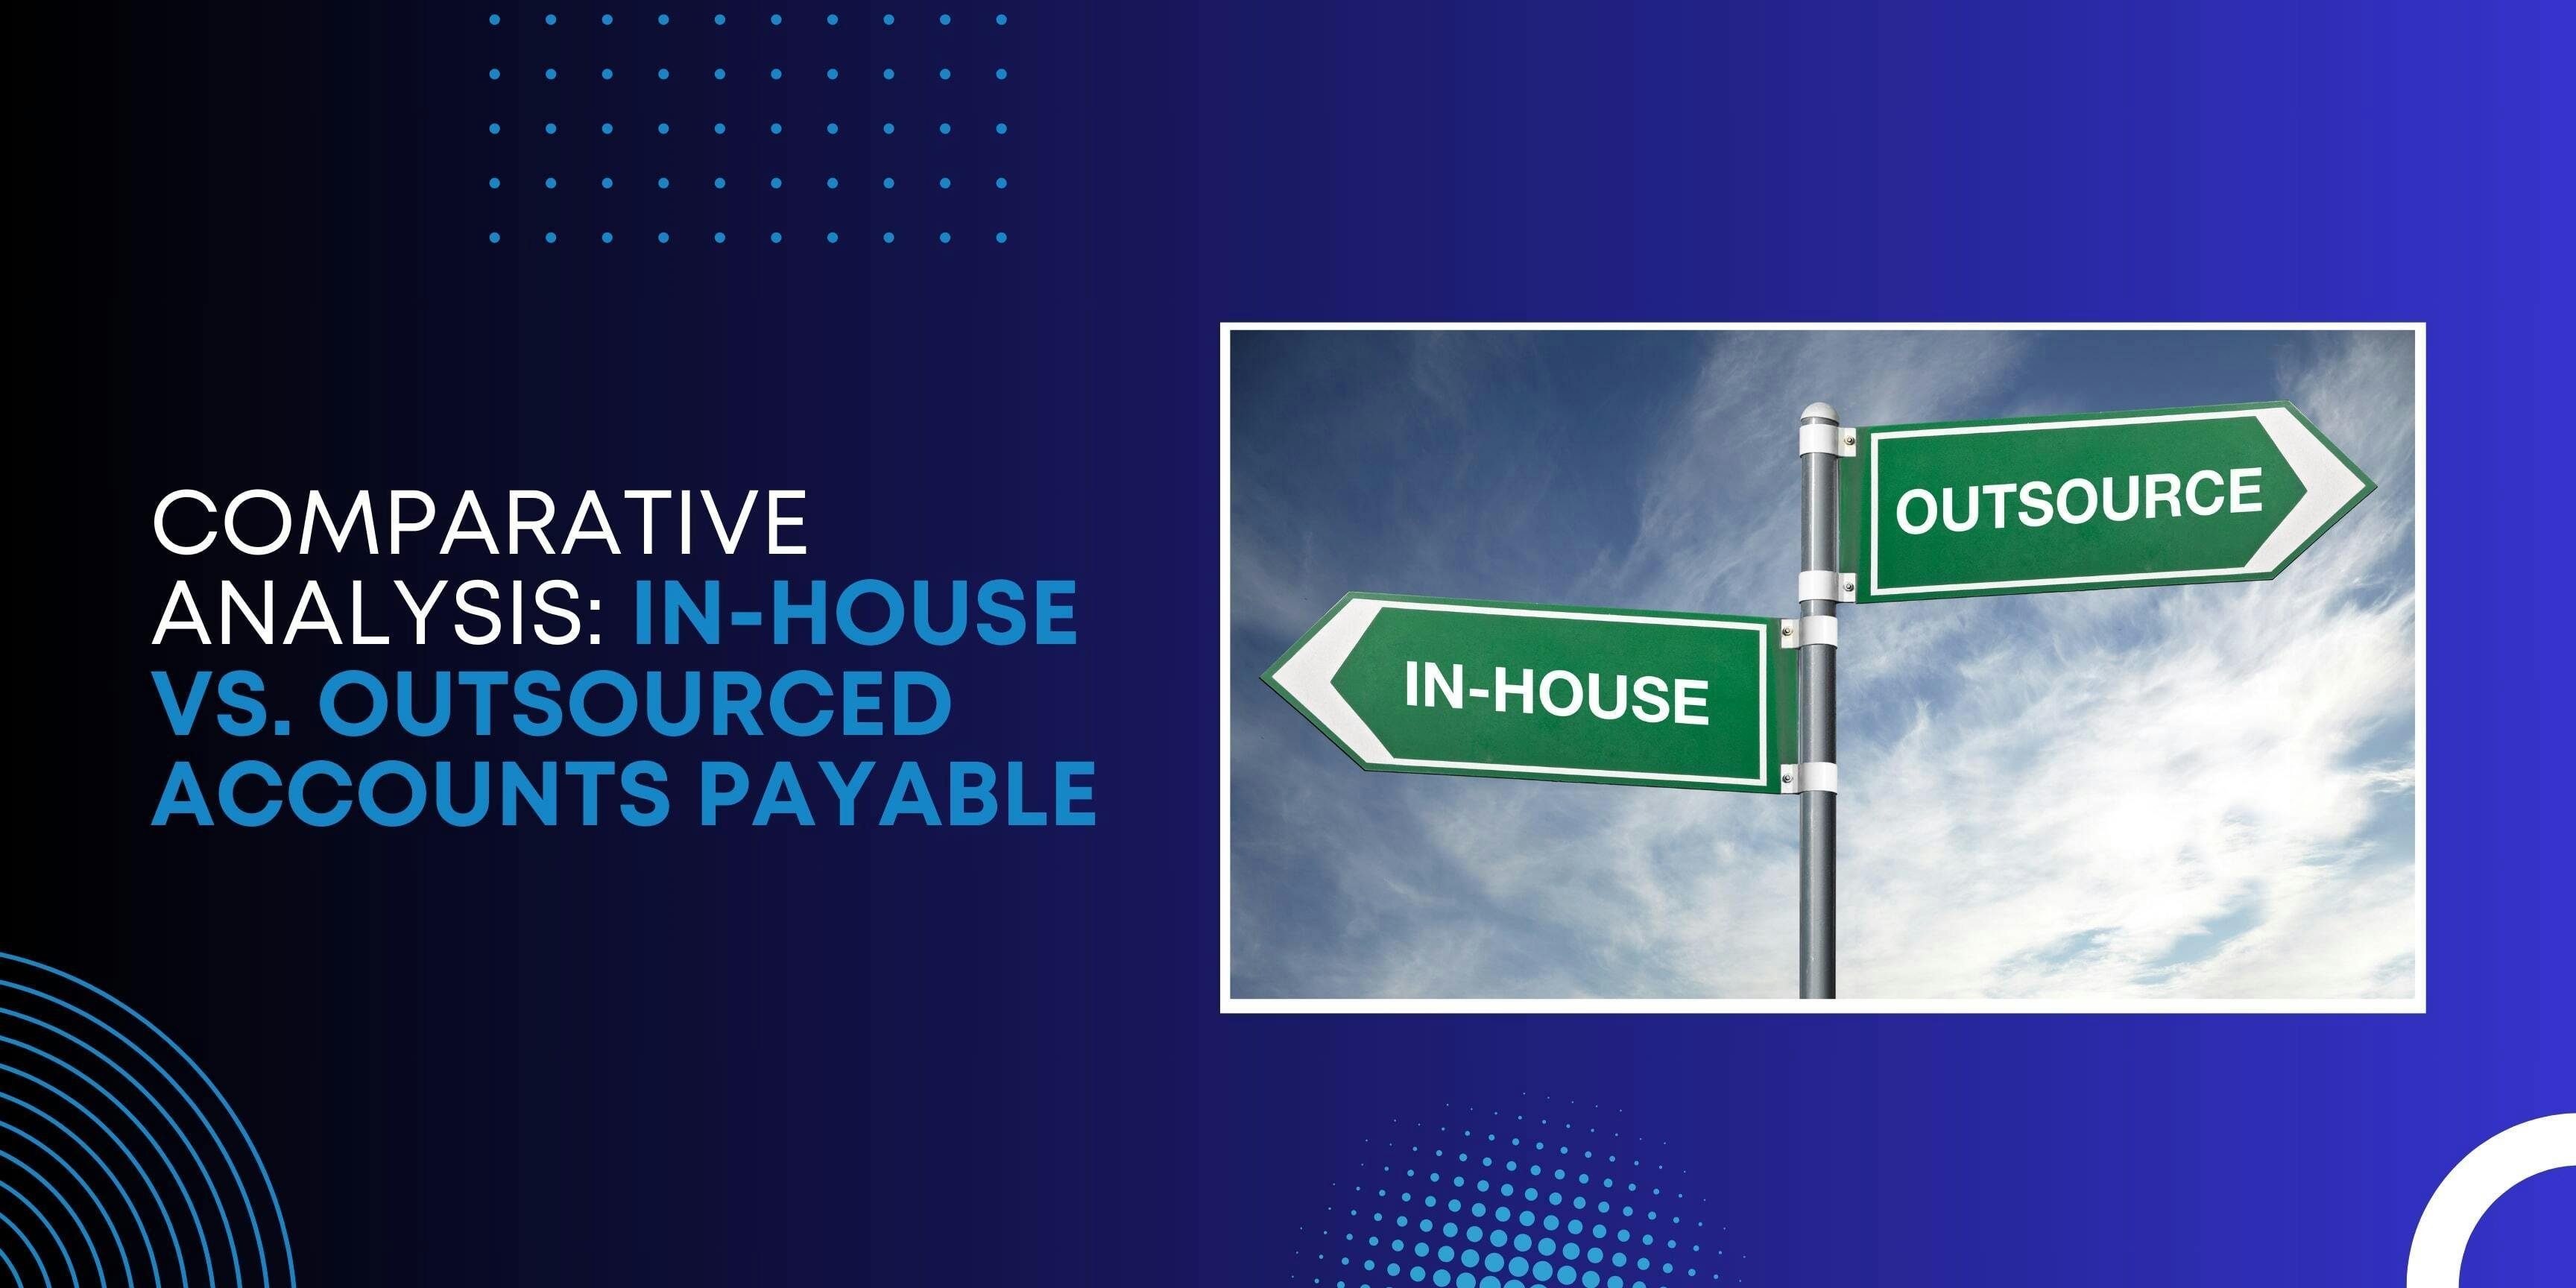 Comparative Analysis: In-house vs. Outsourced Accounts Payable